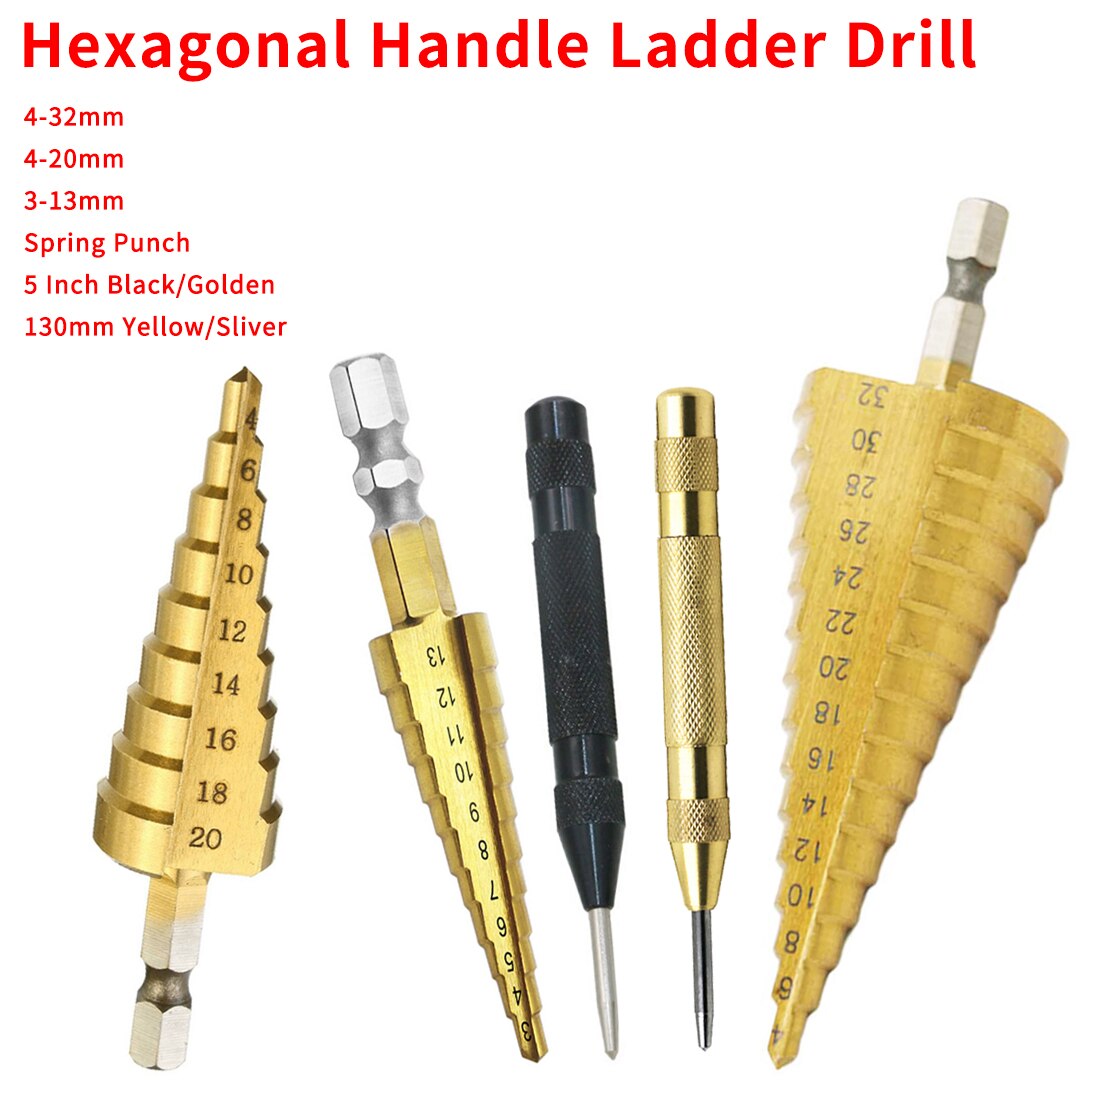 Pagode Vorm Hole Cutter 4-20/32 Mm 5 Inch Hss Staal Cone Boor Set Hex Stap boor Center Punch Houten Snijder